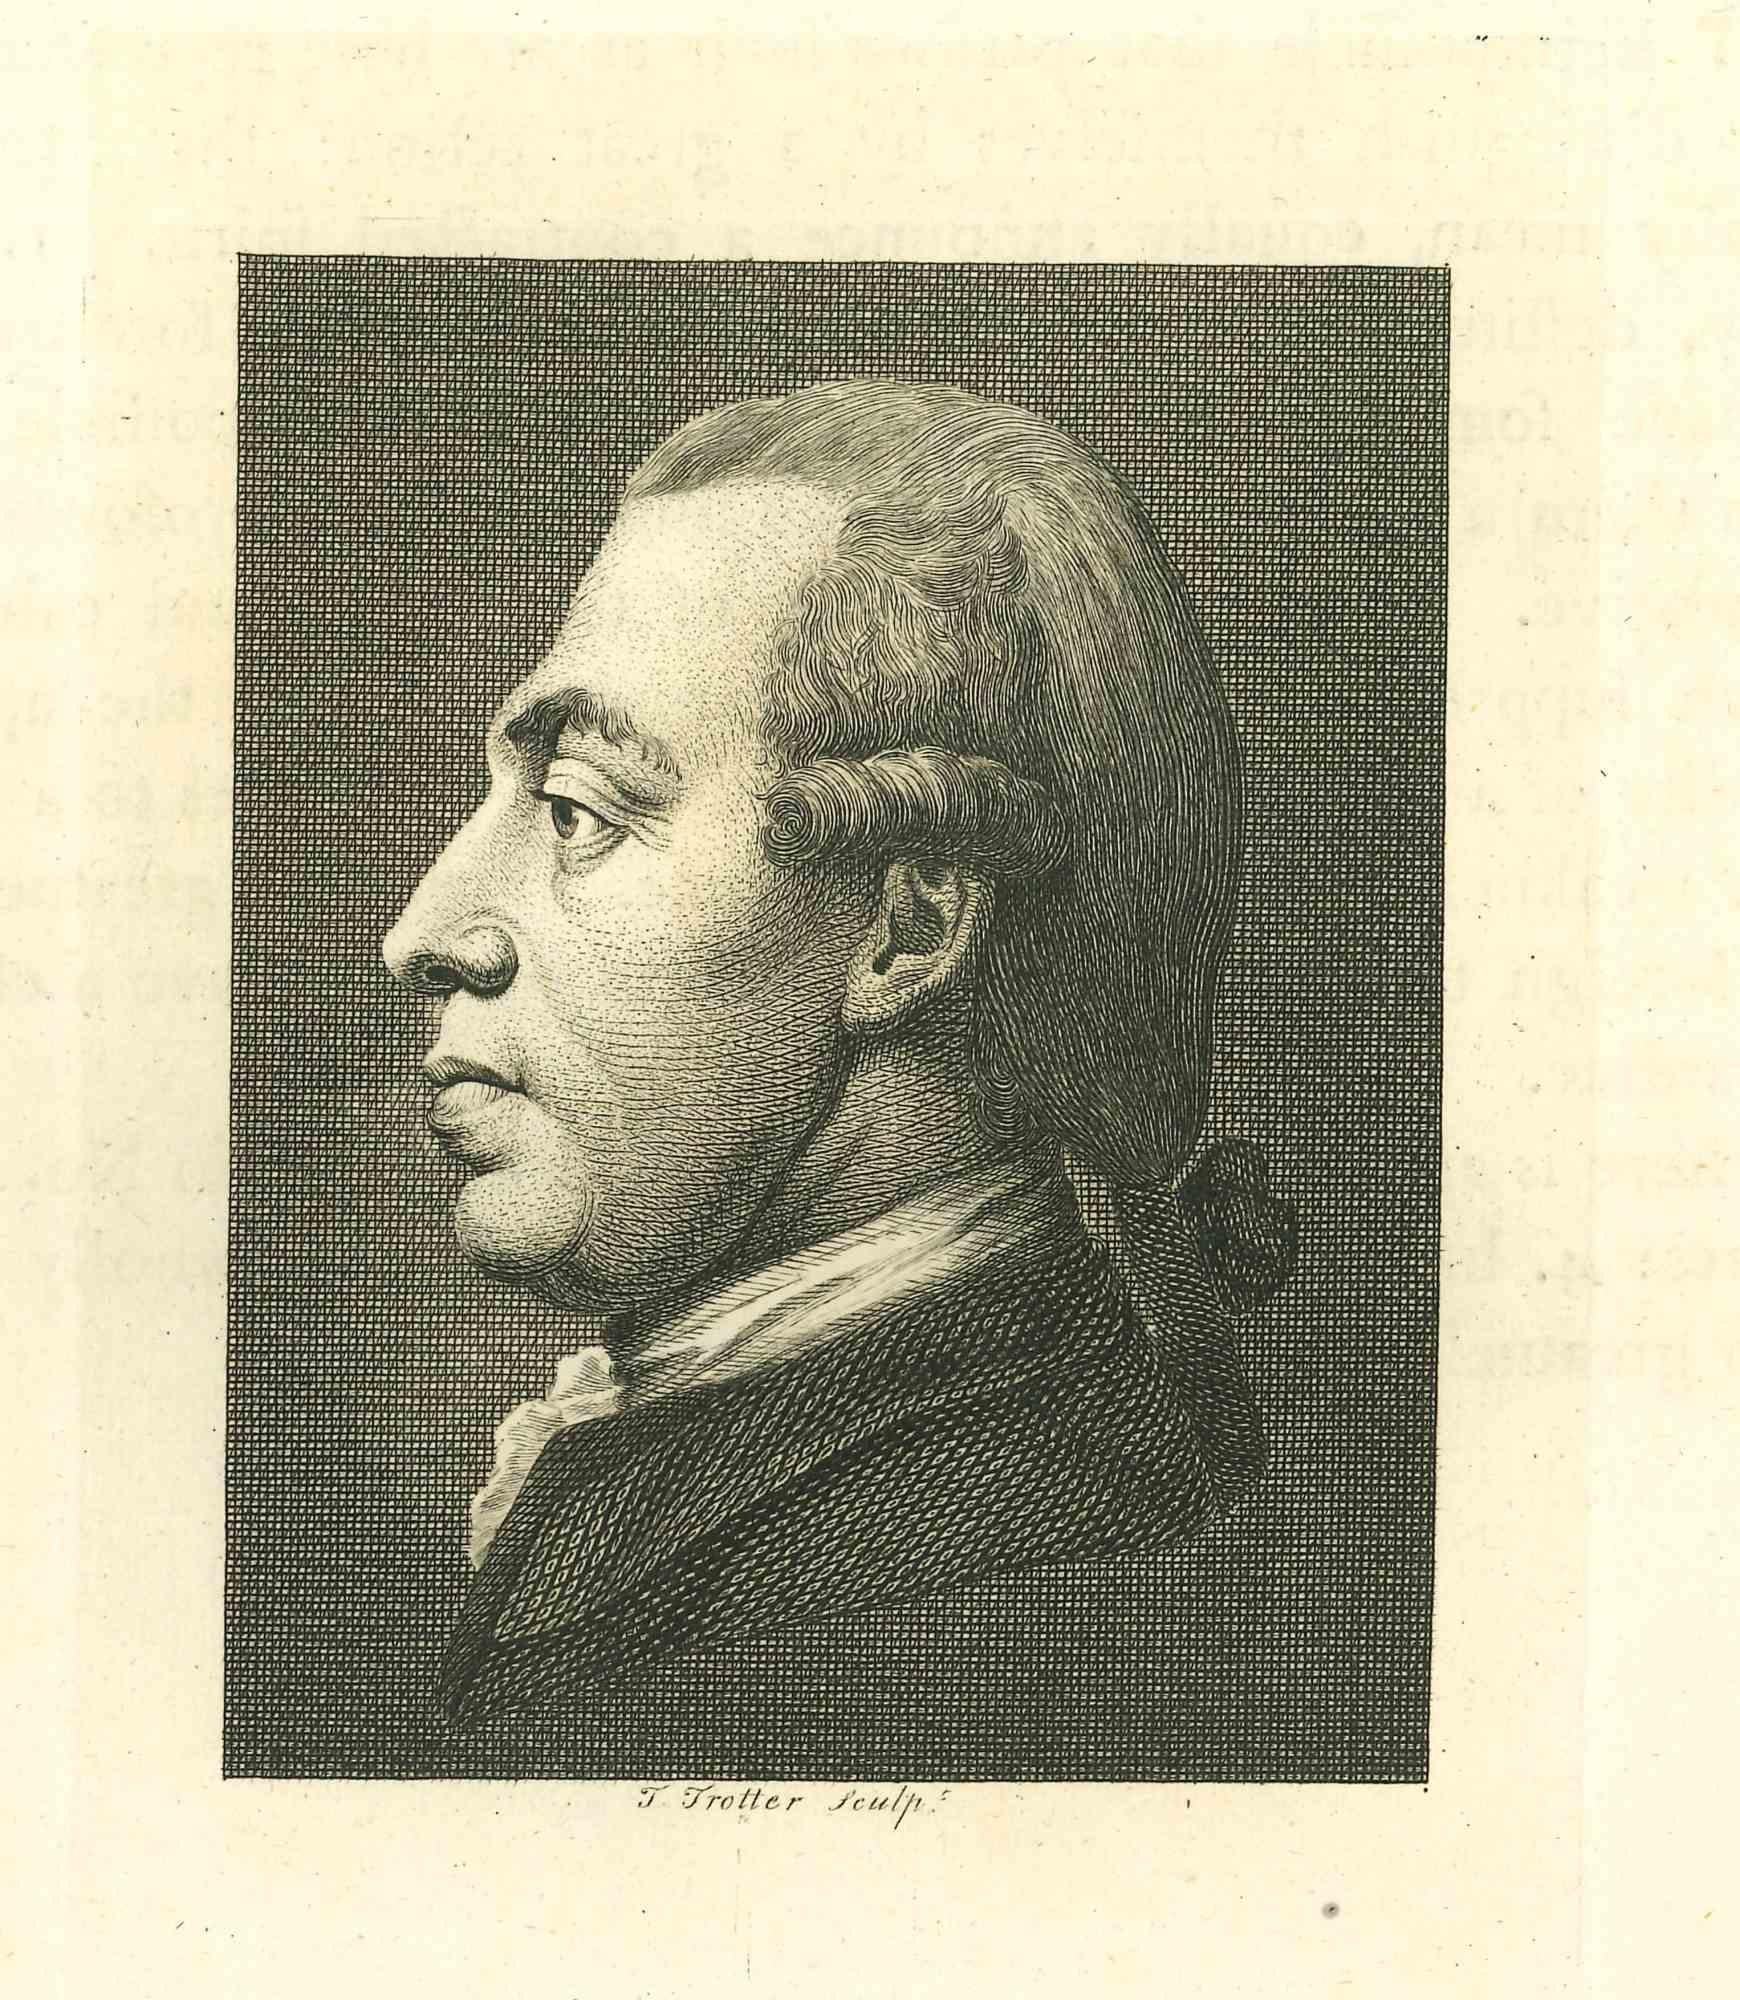 The Profile is an original etching artwork realized by Thomas Holloway for Johann Caspar Lavater's "Essays on Physiognomy, Designed to Promote the Knowledge and the Love of Mankind", London, Bensley, 1810. 

With the script on the rear.

Signed on